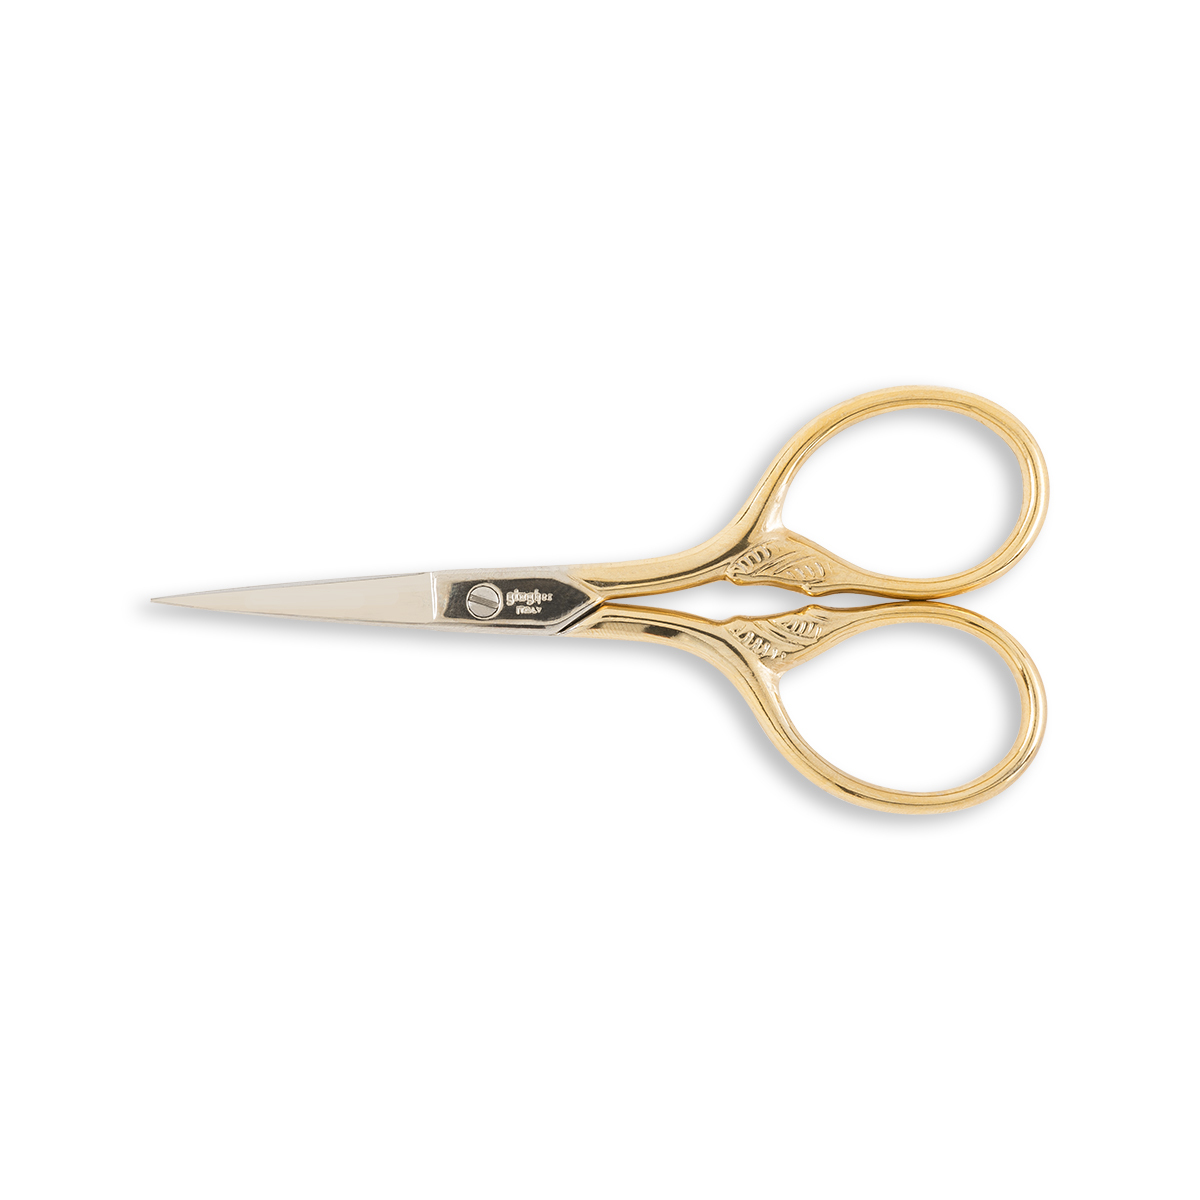 Gingher Gold-Handled Lion's Tail Embroidery Scissors - 3 1/2 - WAWAK  Sewing Supplies